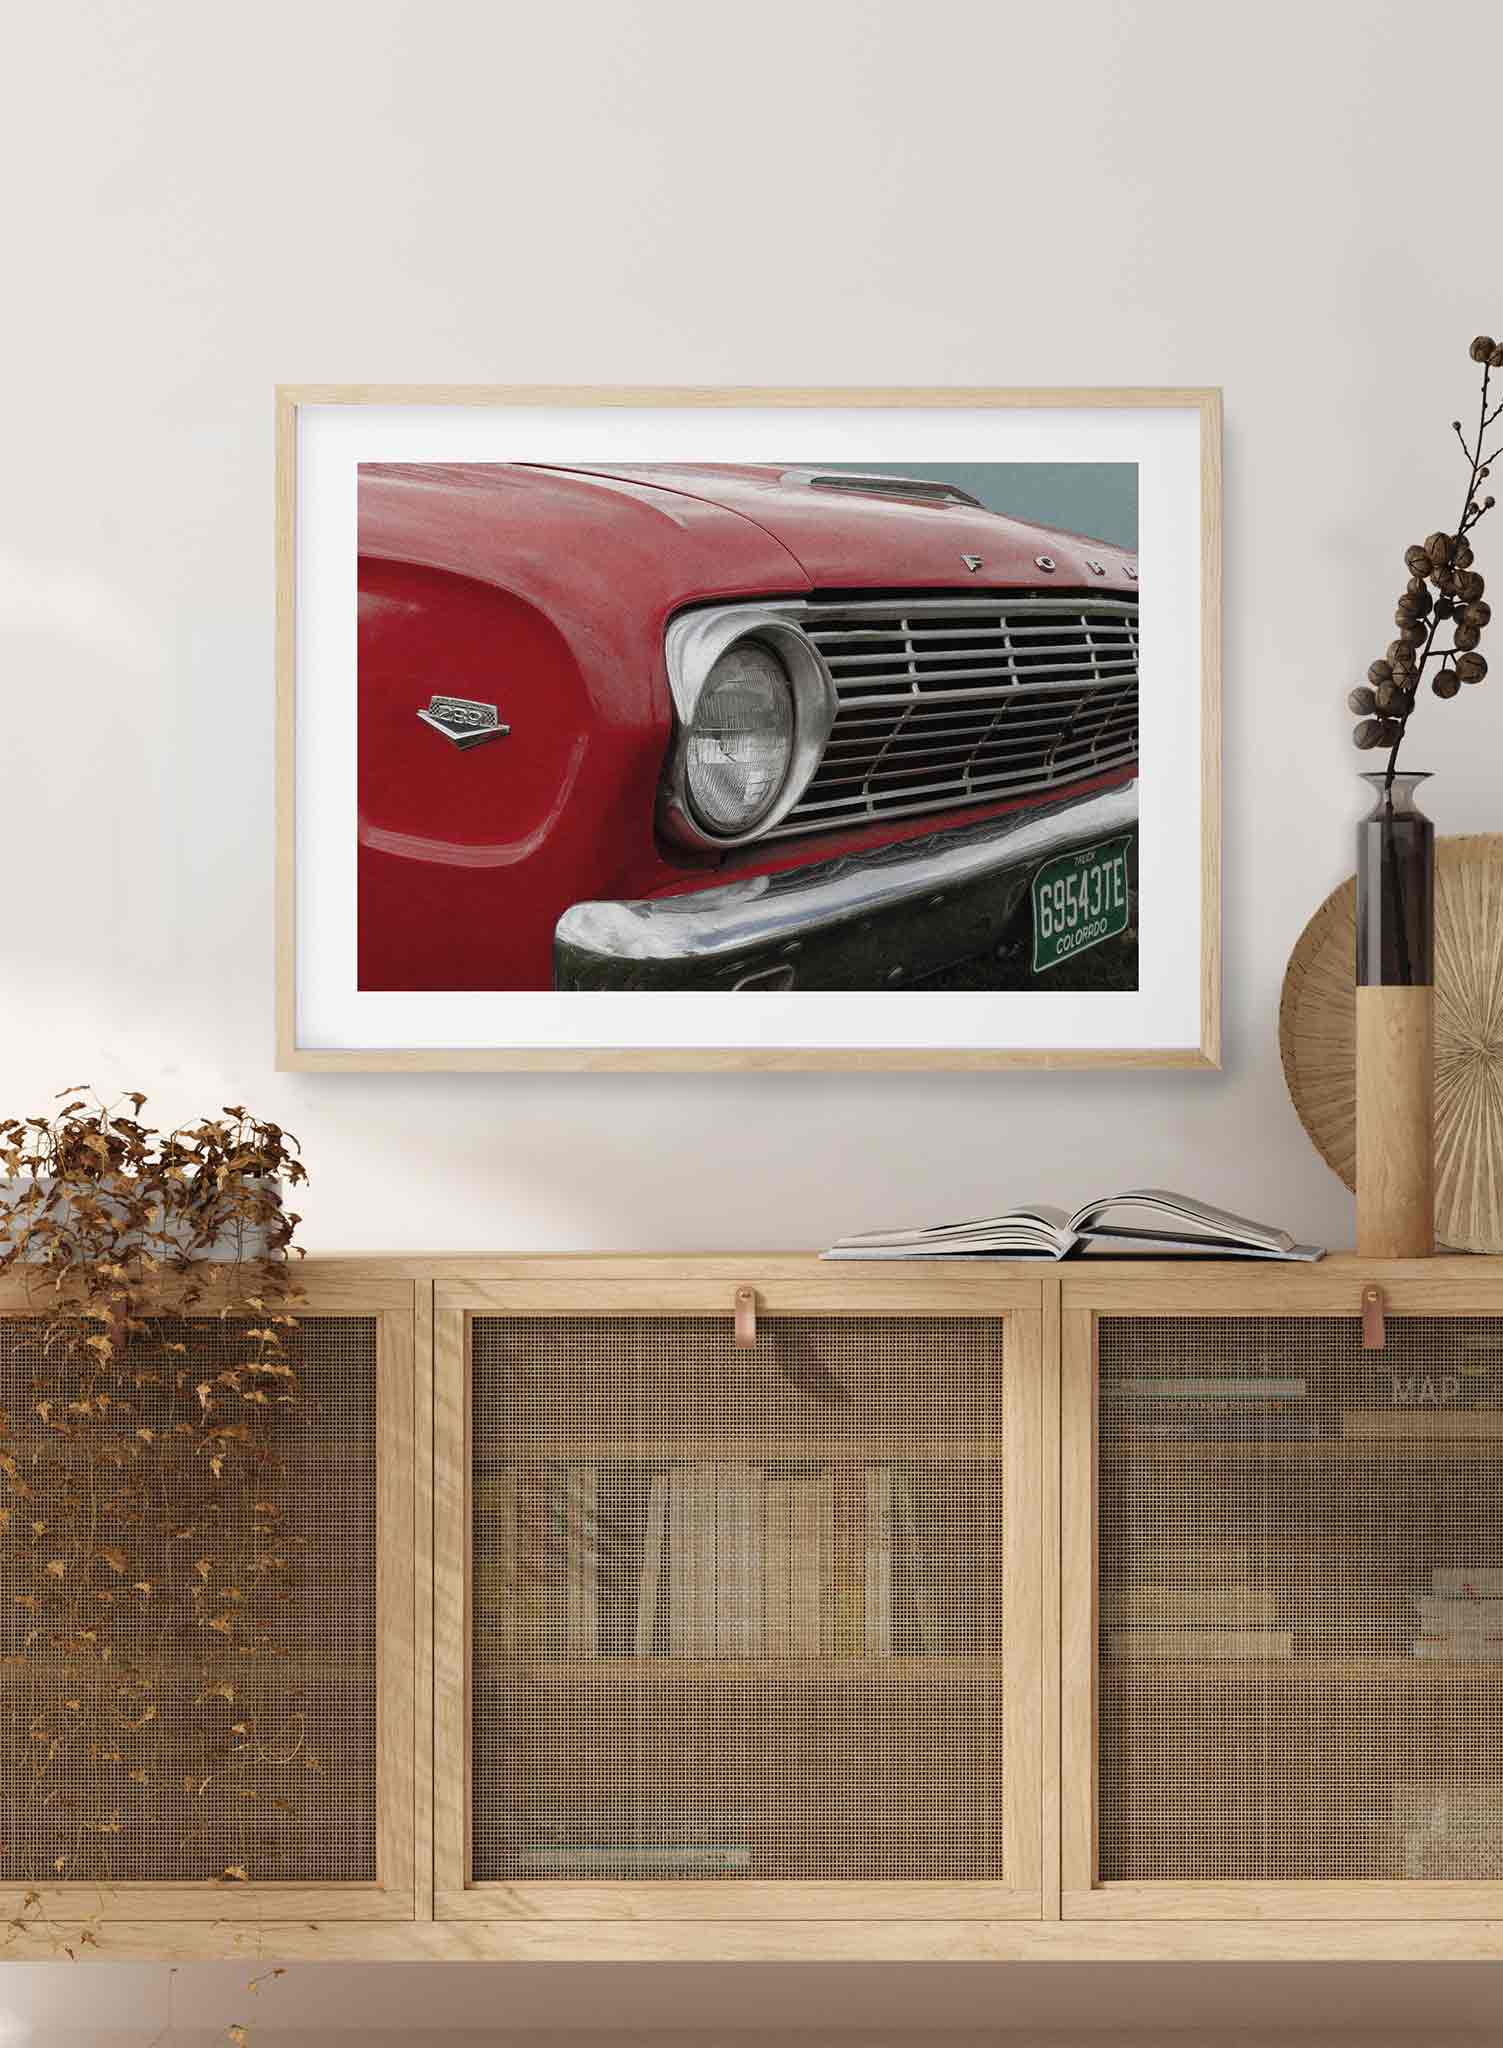 ‘50s Bumper is a vintage photography poster of a red Ford car's bumper by Opposite Wall.